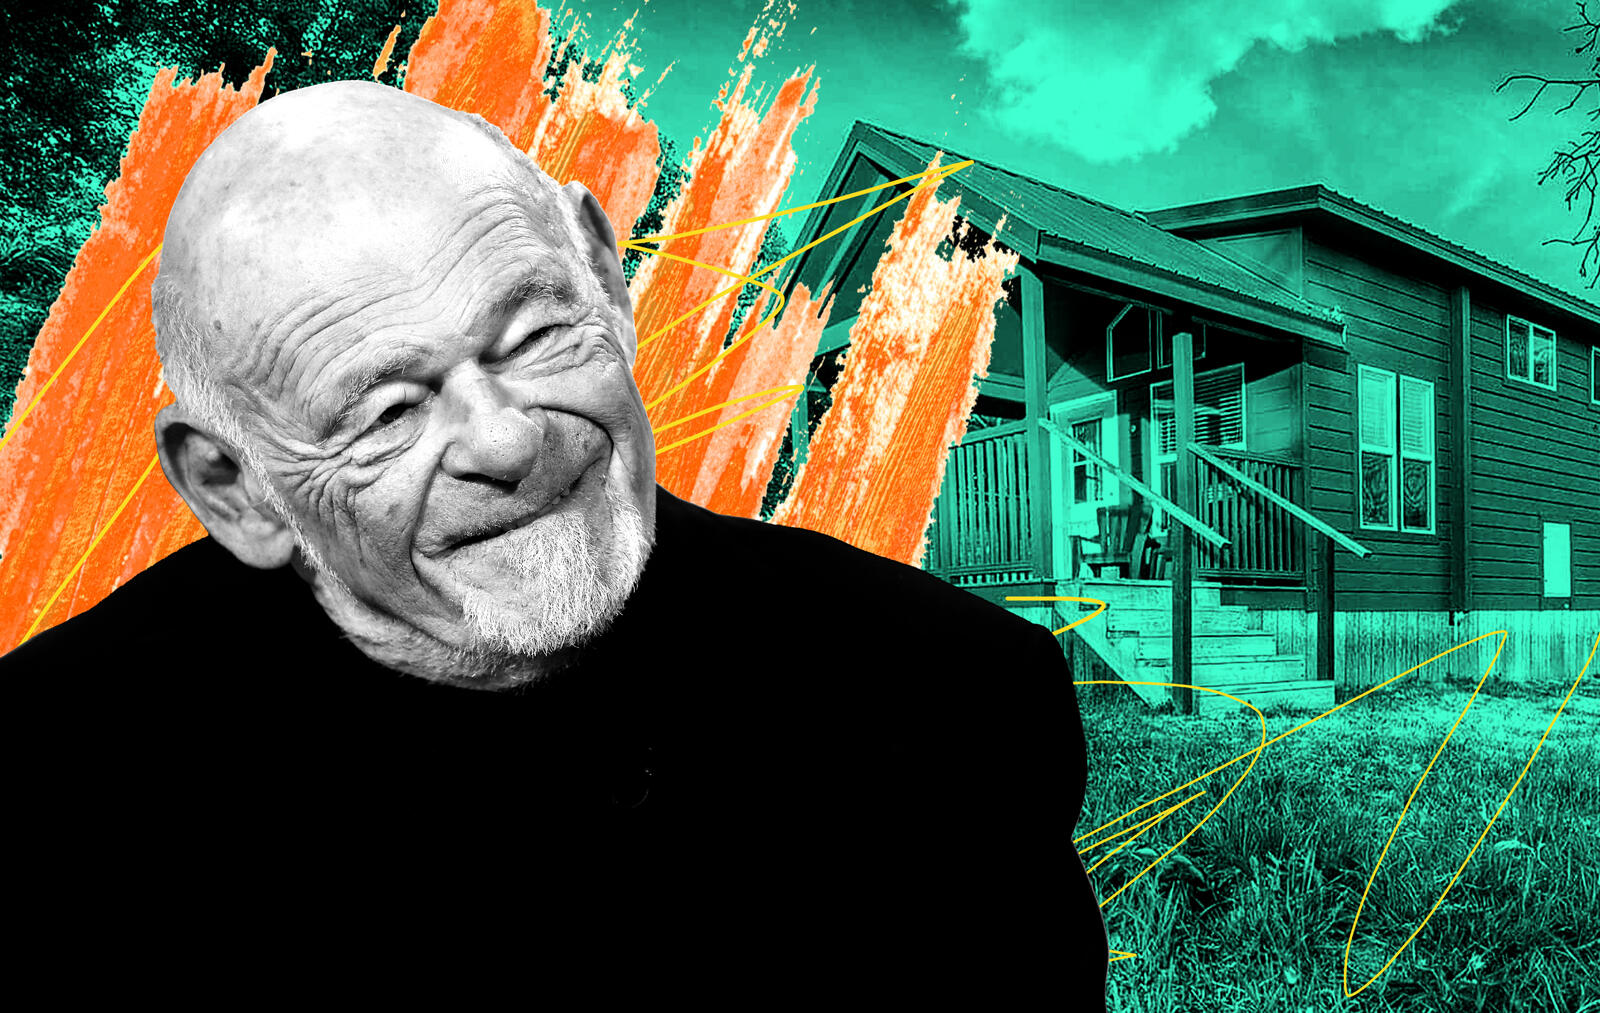 Sam Zell with a RVC Outdoor Destinations site (Getty, RVC)